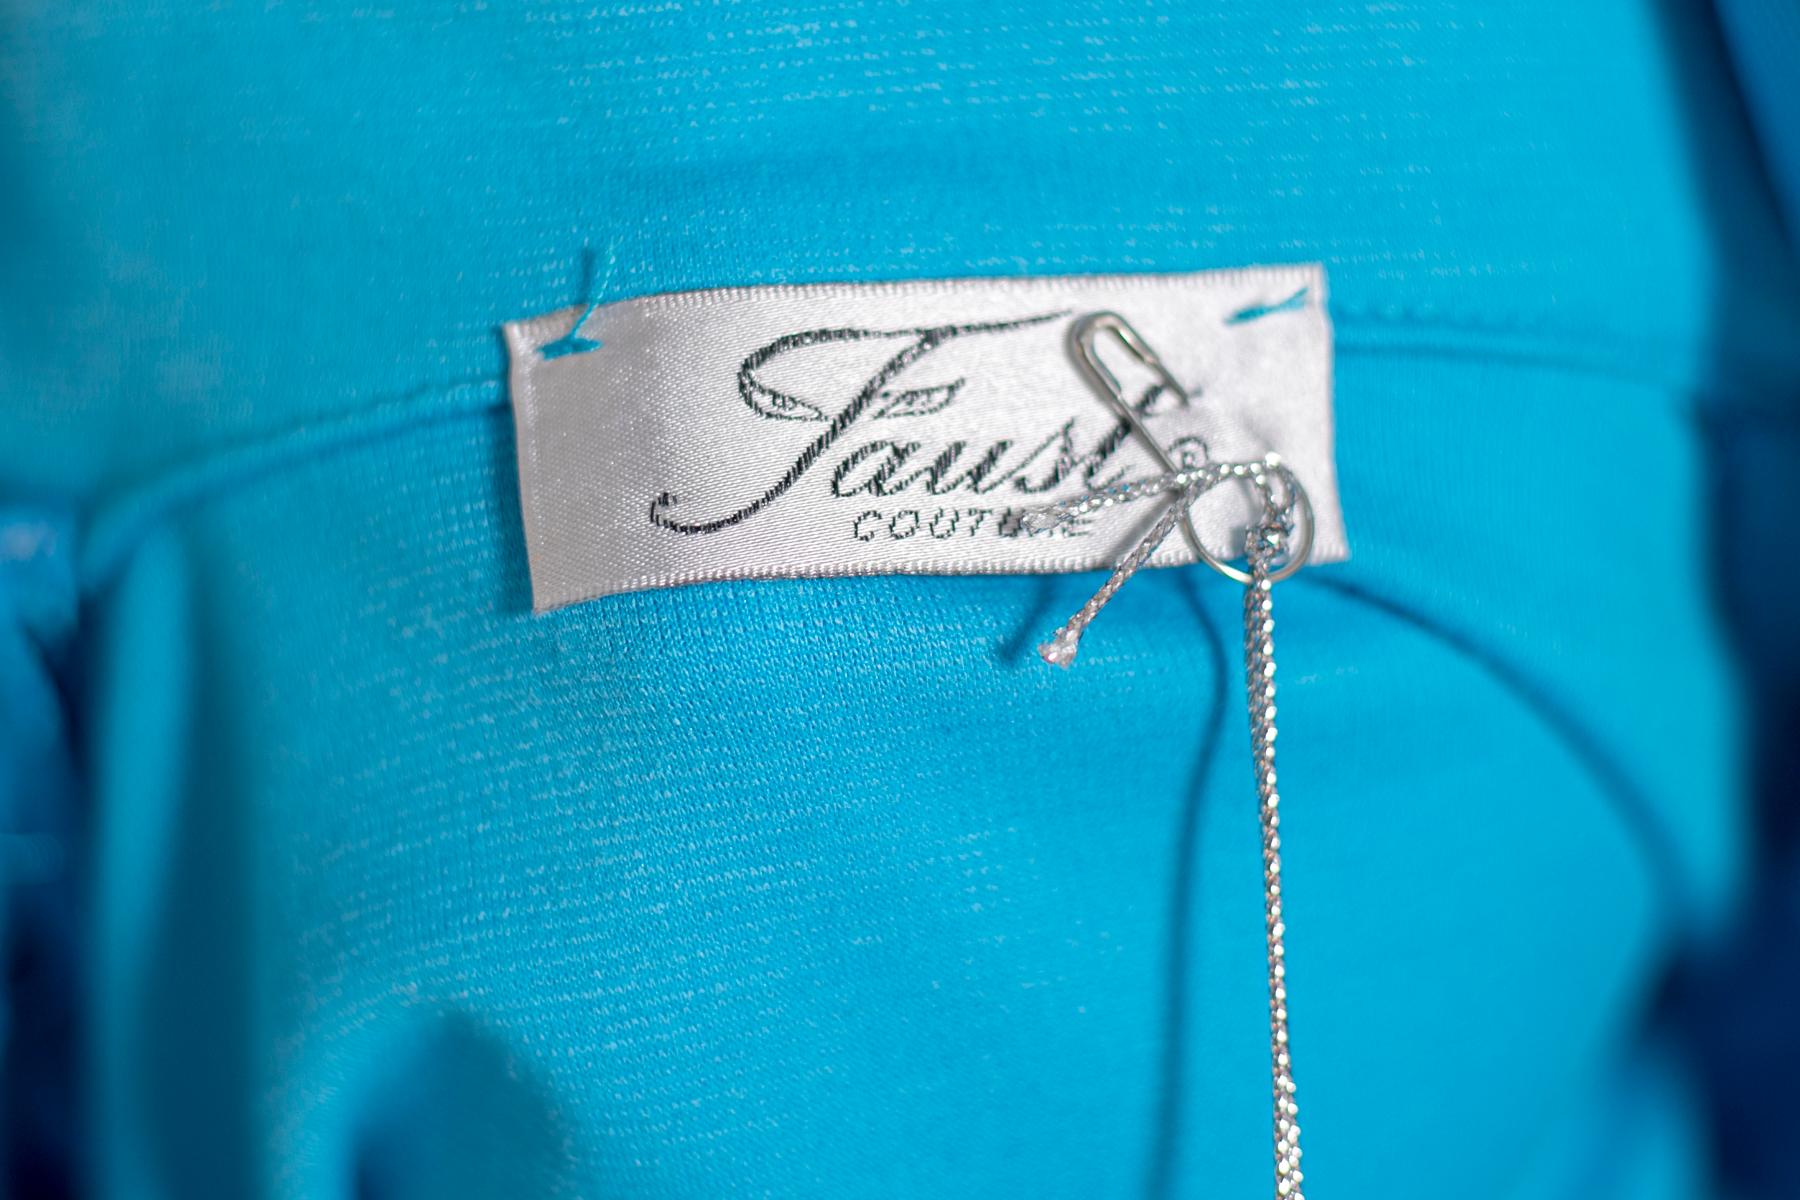 Wonderful elegant turquoise dress by Faust from the 1990s, made in France. ORIGINAL LABELS.
The dress is short, above the knee and is turquoise in color. It has long fine sleeves. the collar is high and the highlight of the garment. In fact, it is